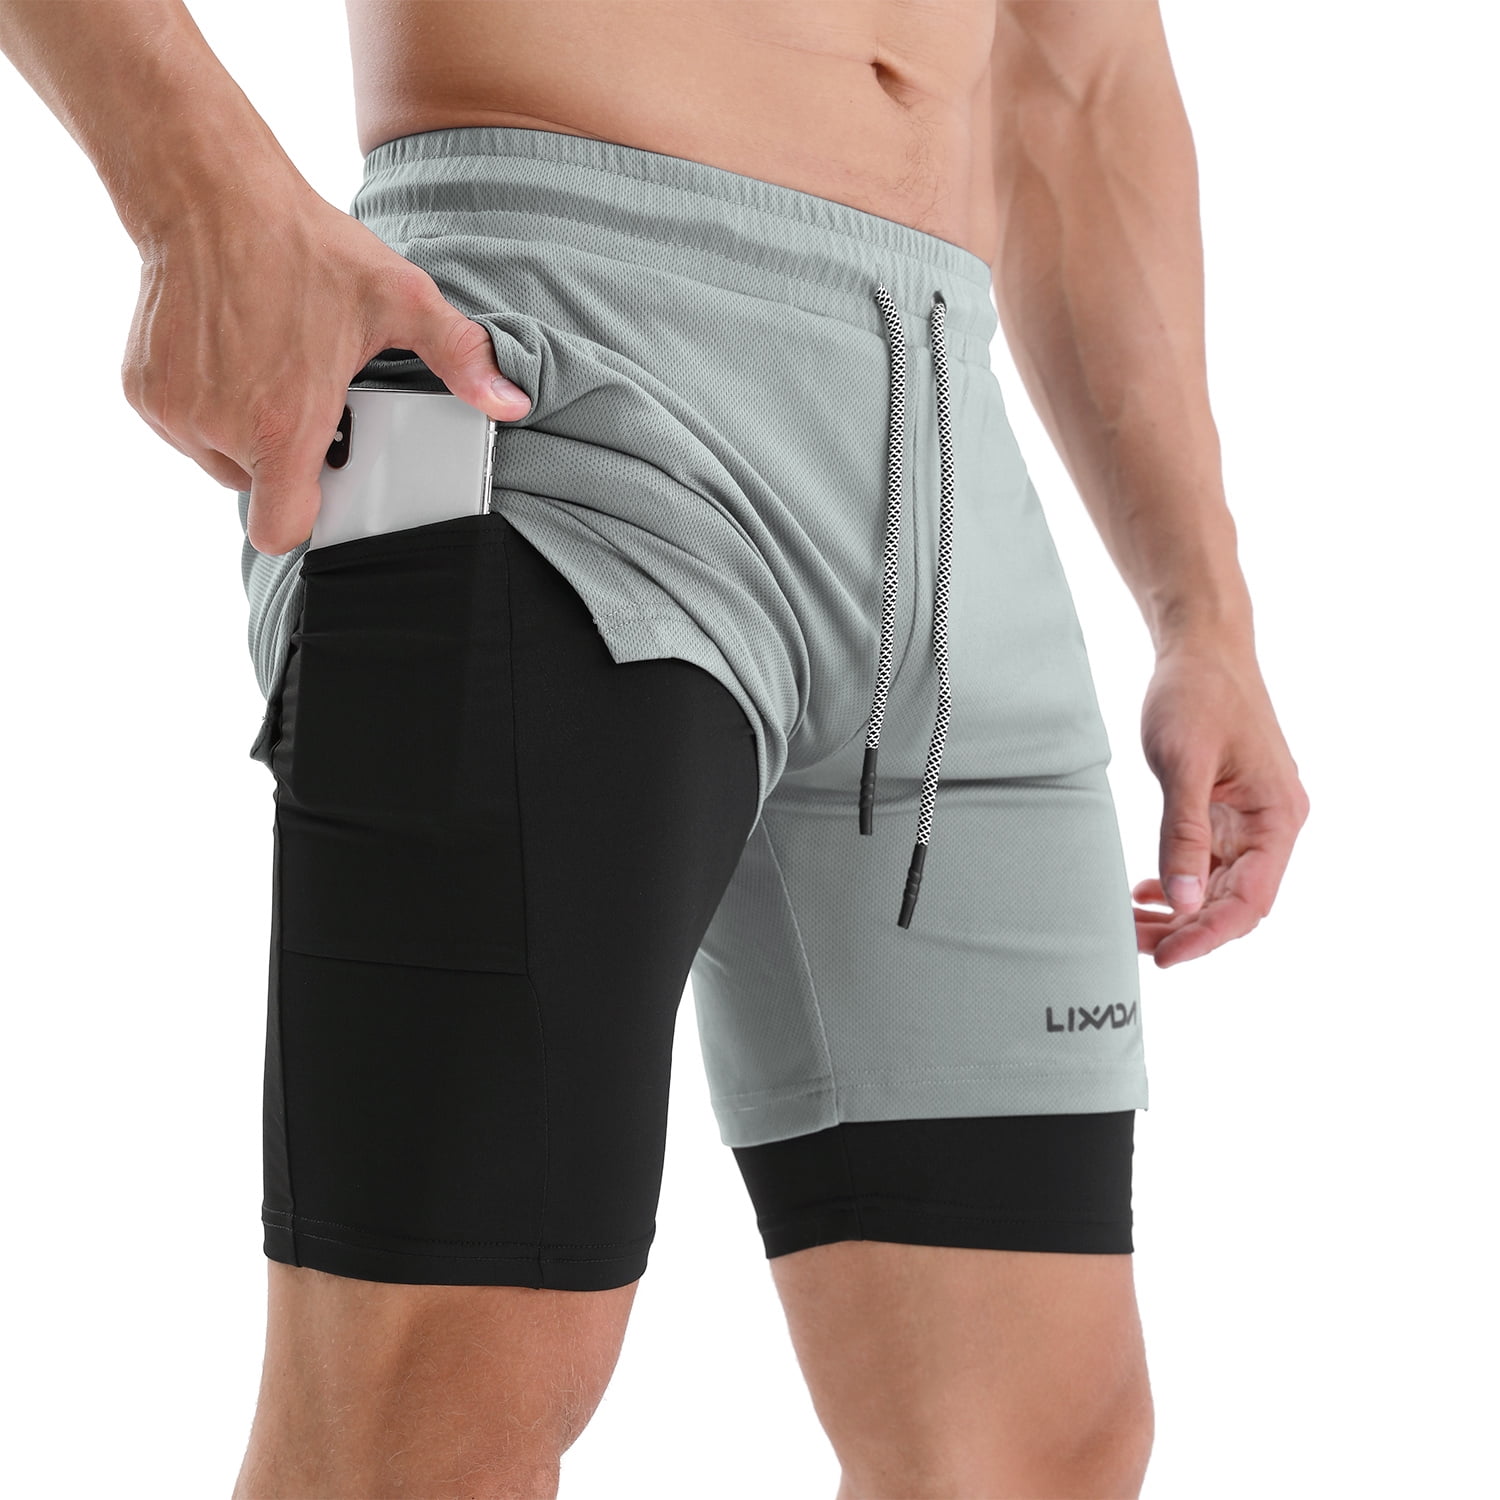 CLOUSPO 2 in 1 Gym Shorts Running Shorts Quick Drying Breathable Shorts with Back Zipped Pocket and Towel Pocket Inner Short Exercise Workout Cycling Shorts